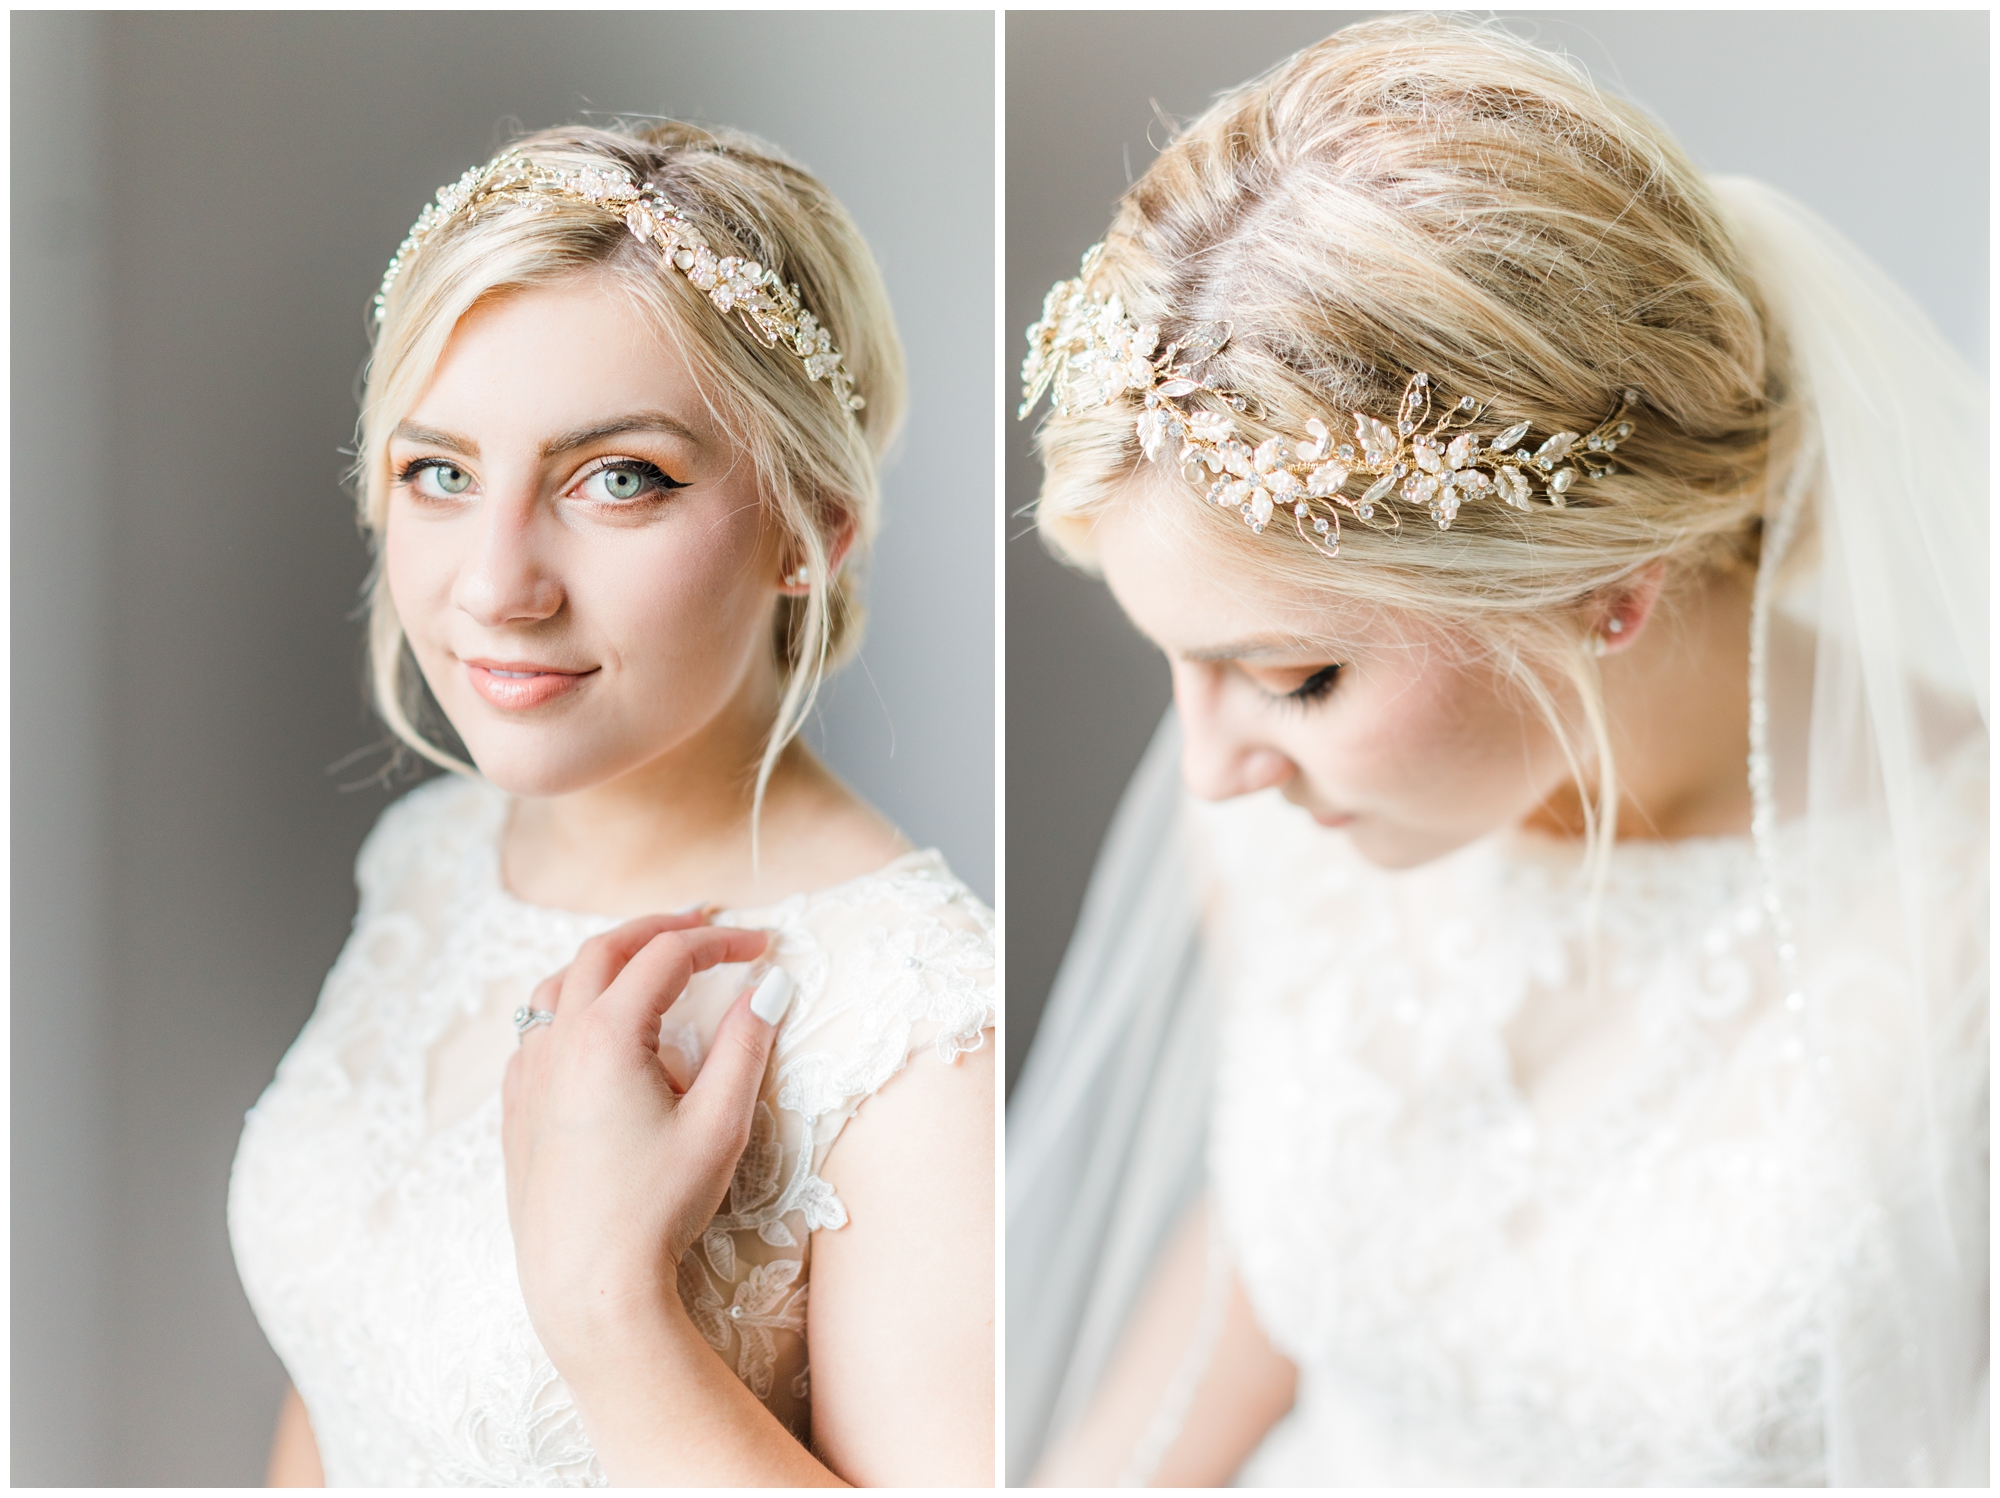 The bride gives a soft smile in a portrait in her gown. In the second picture, she leans her head down to clearly view the white and gold head piece. 